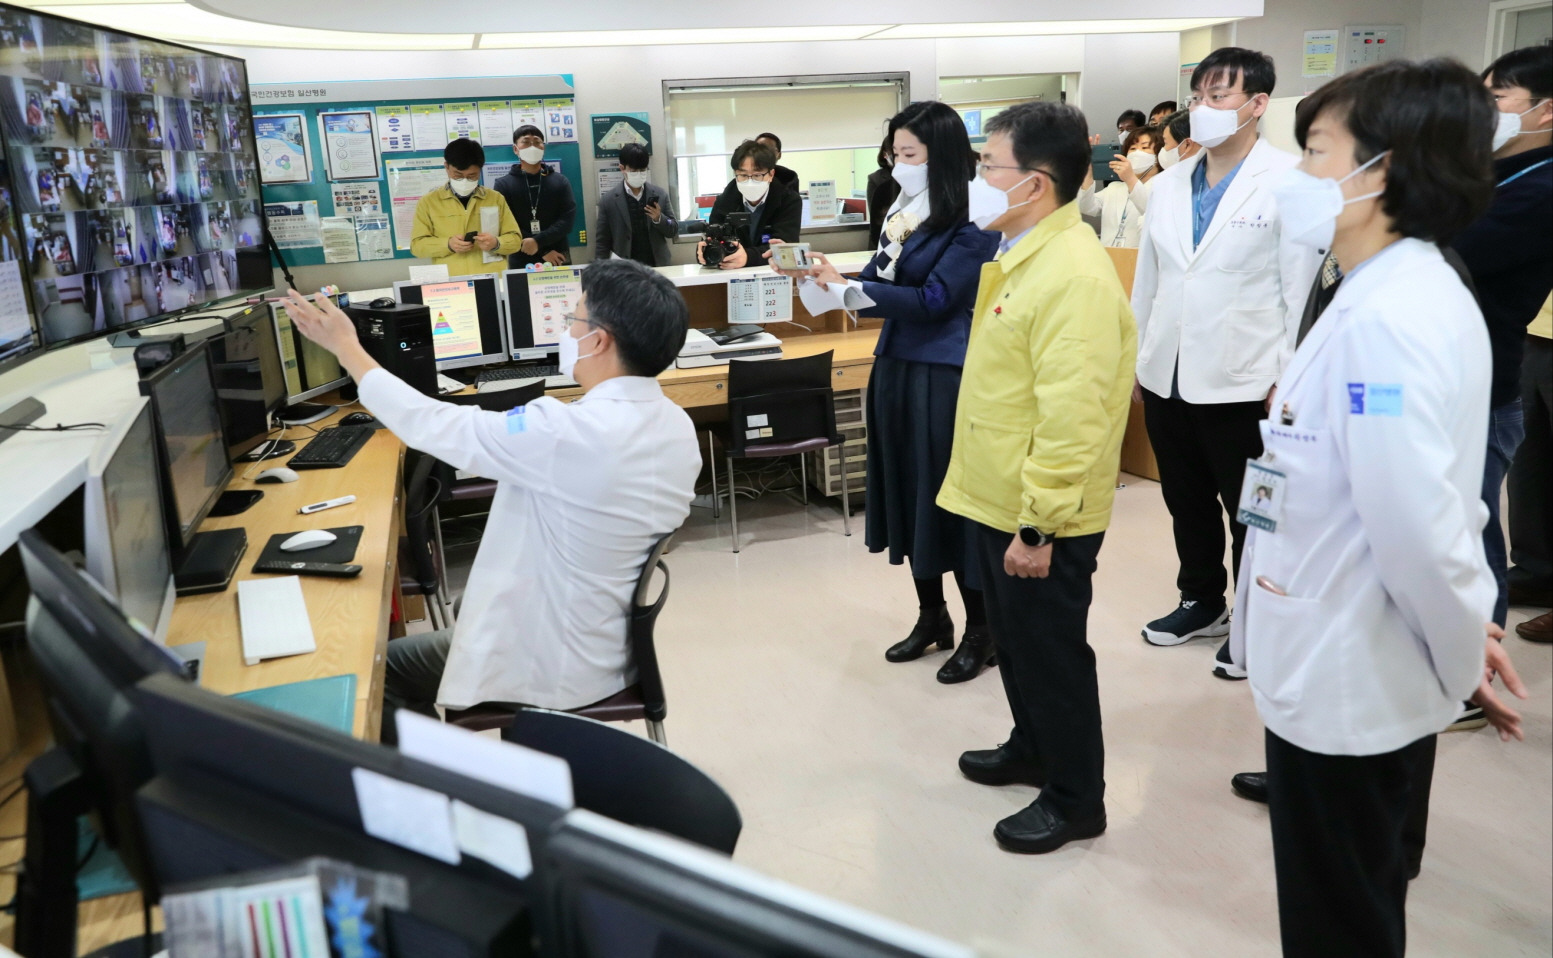 Minister Kwon Checks Hospital Networks in North Gyeonggi for COVID-19 Treatment (January 3) 사진14